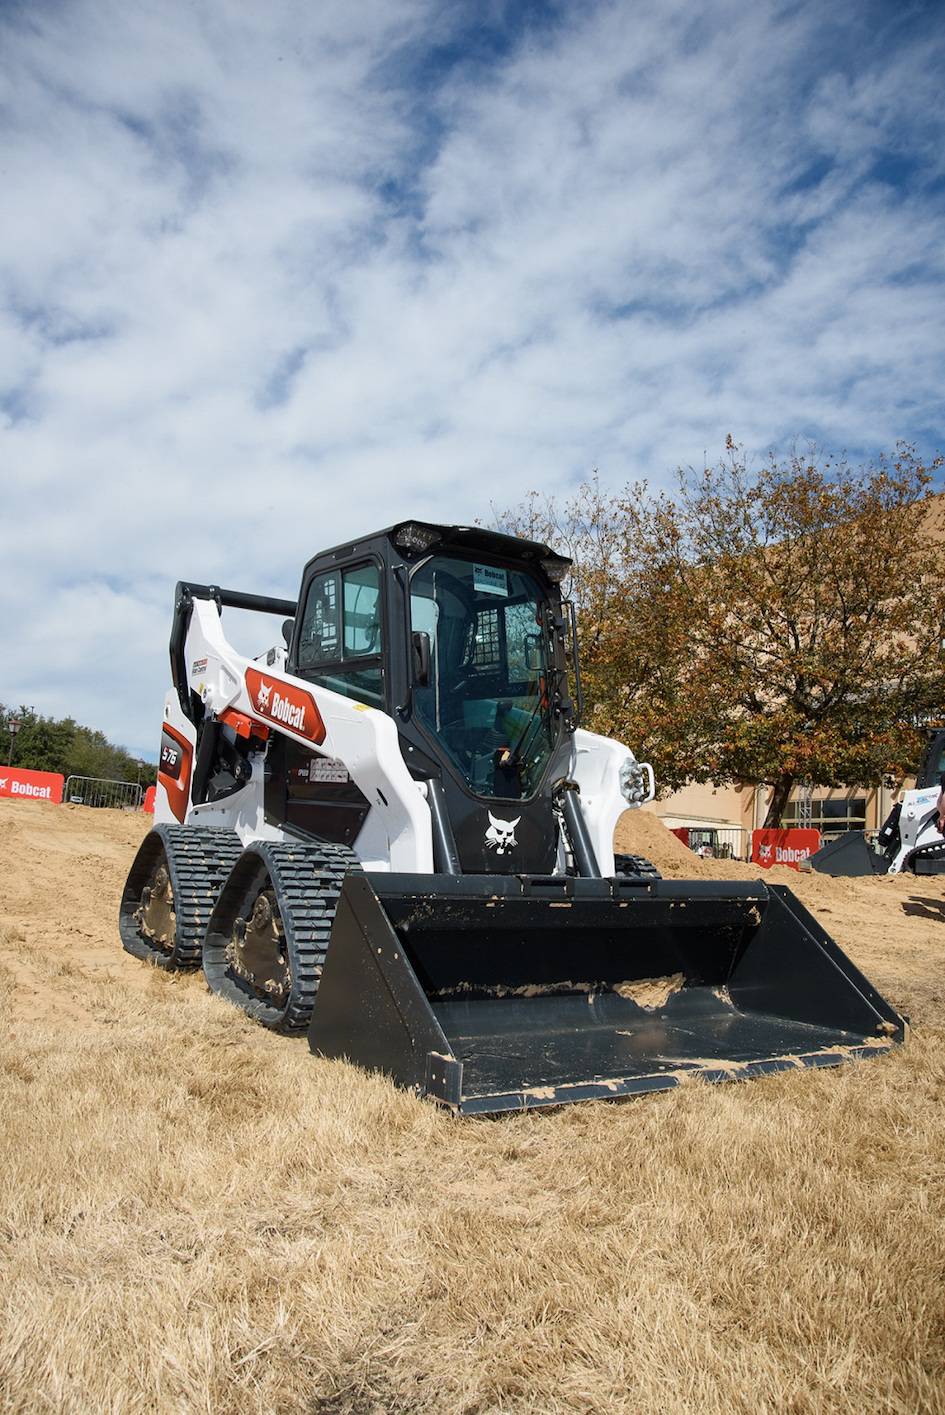 Bobcat stand at bauma to feature new products and technology